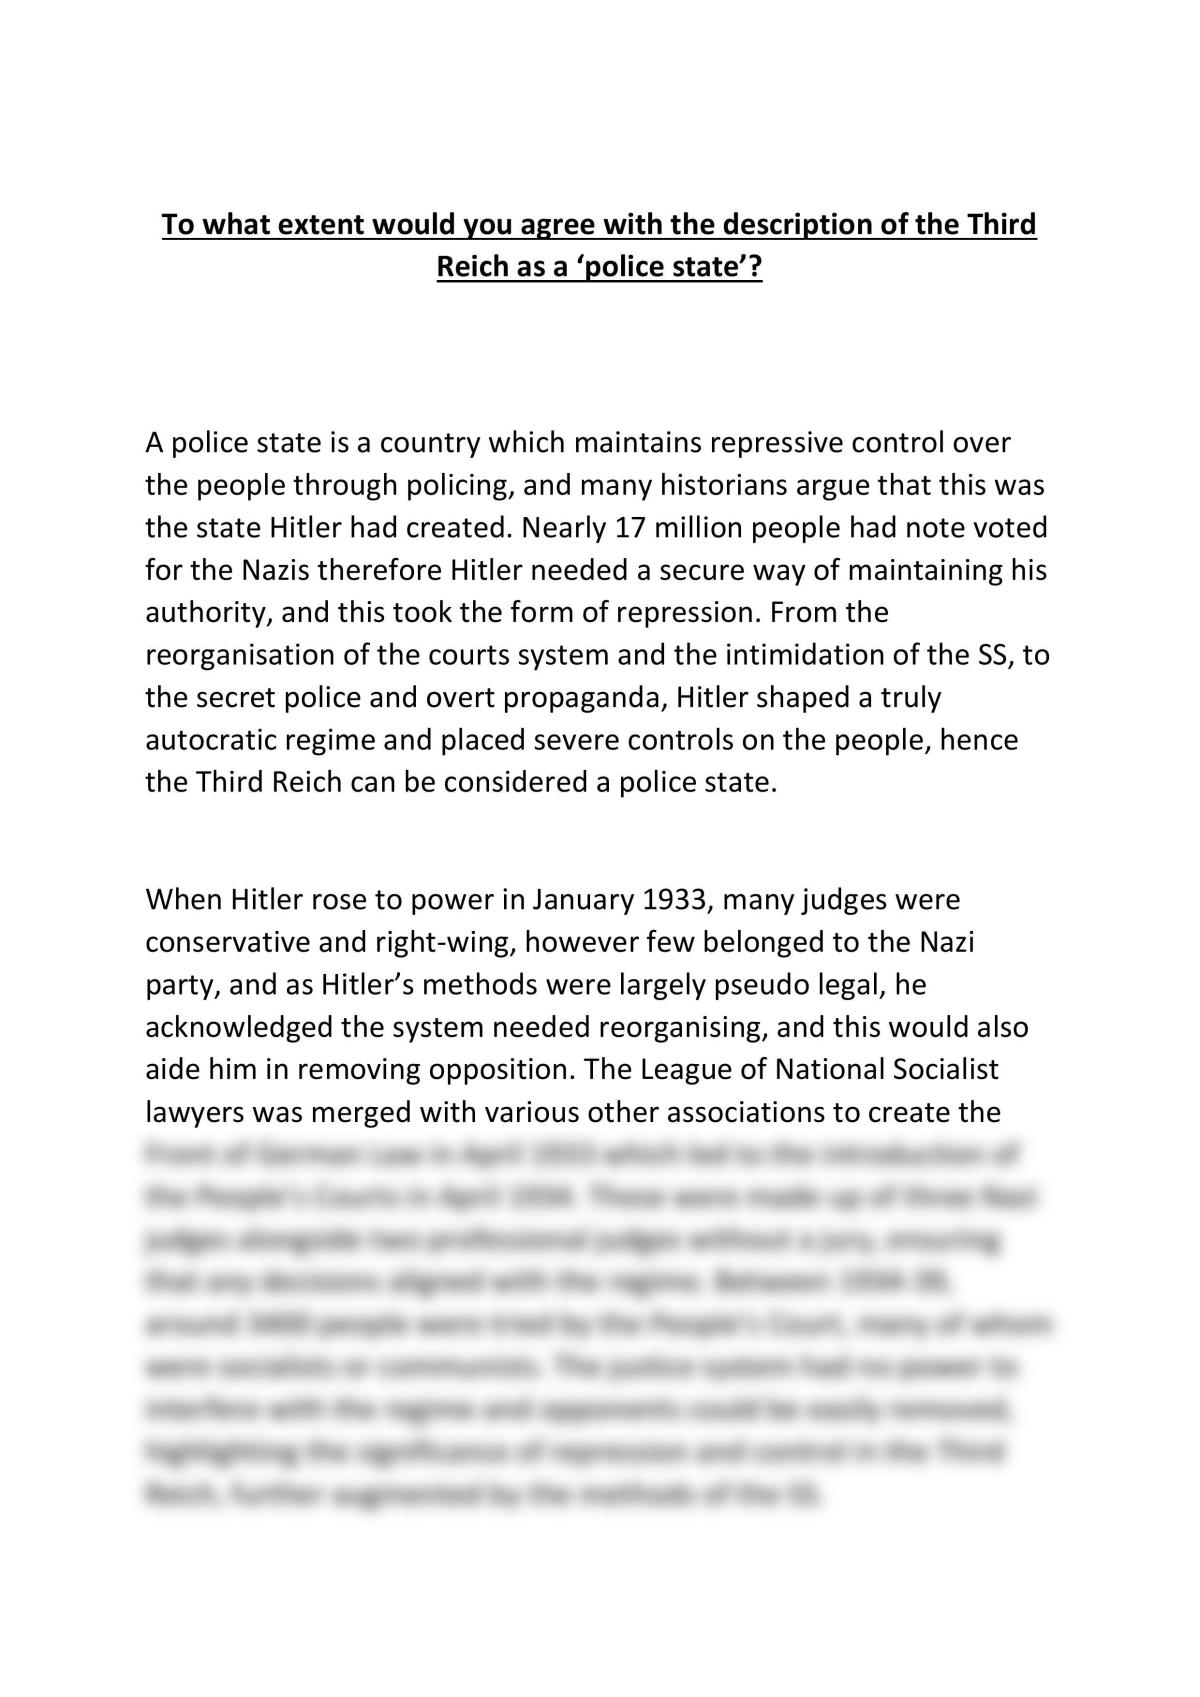 Third Reich as a Police State - Page 1